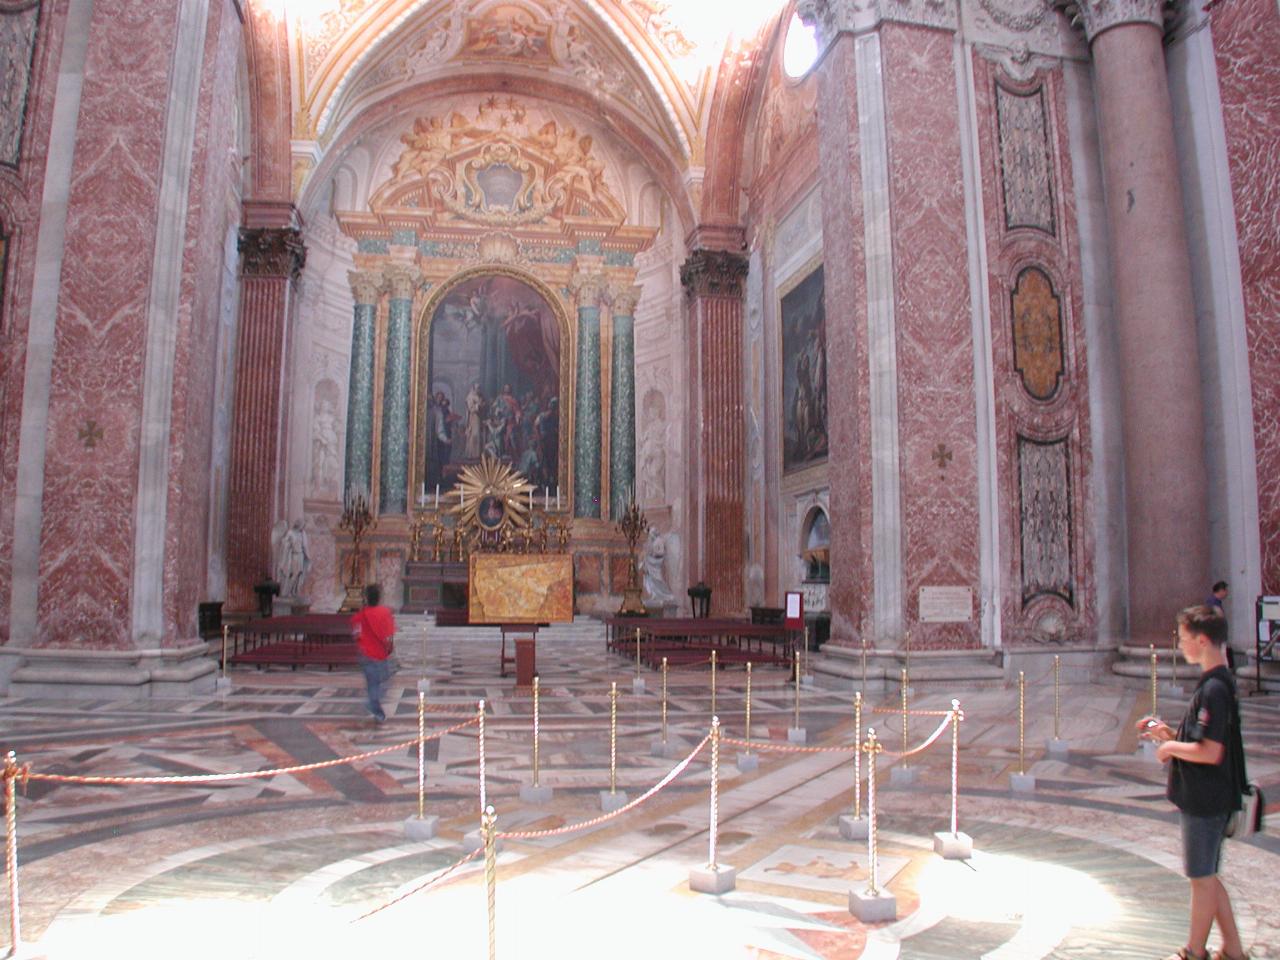 Another altar and the (roped off) astronomical guide in S. Maria Degli Angeli